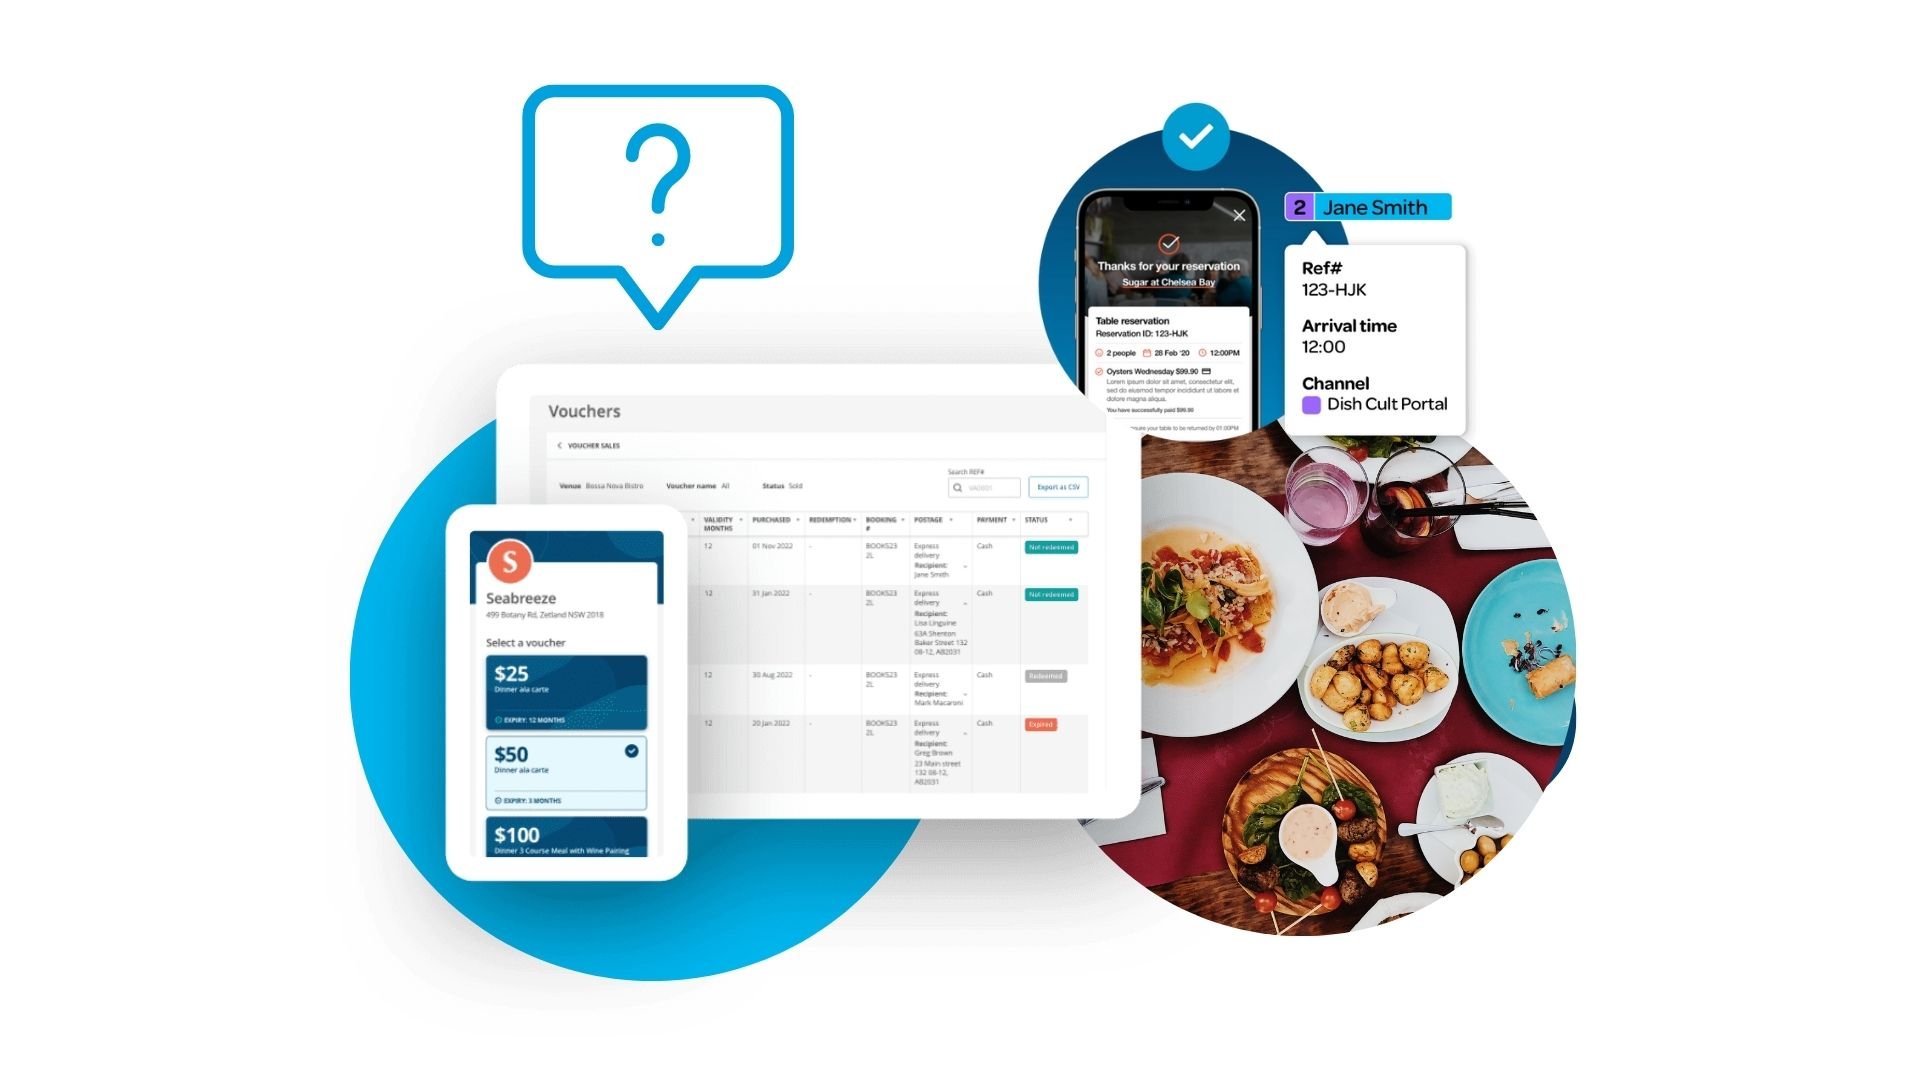 FAQs about restaurant booking systems like ResDiary